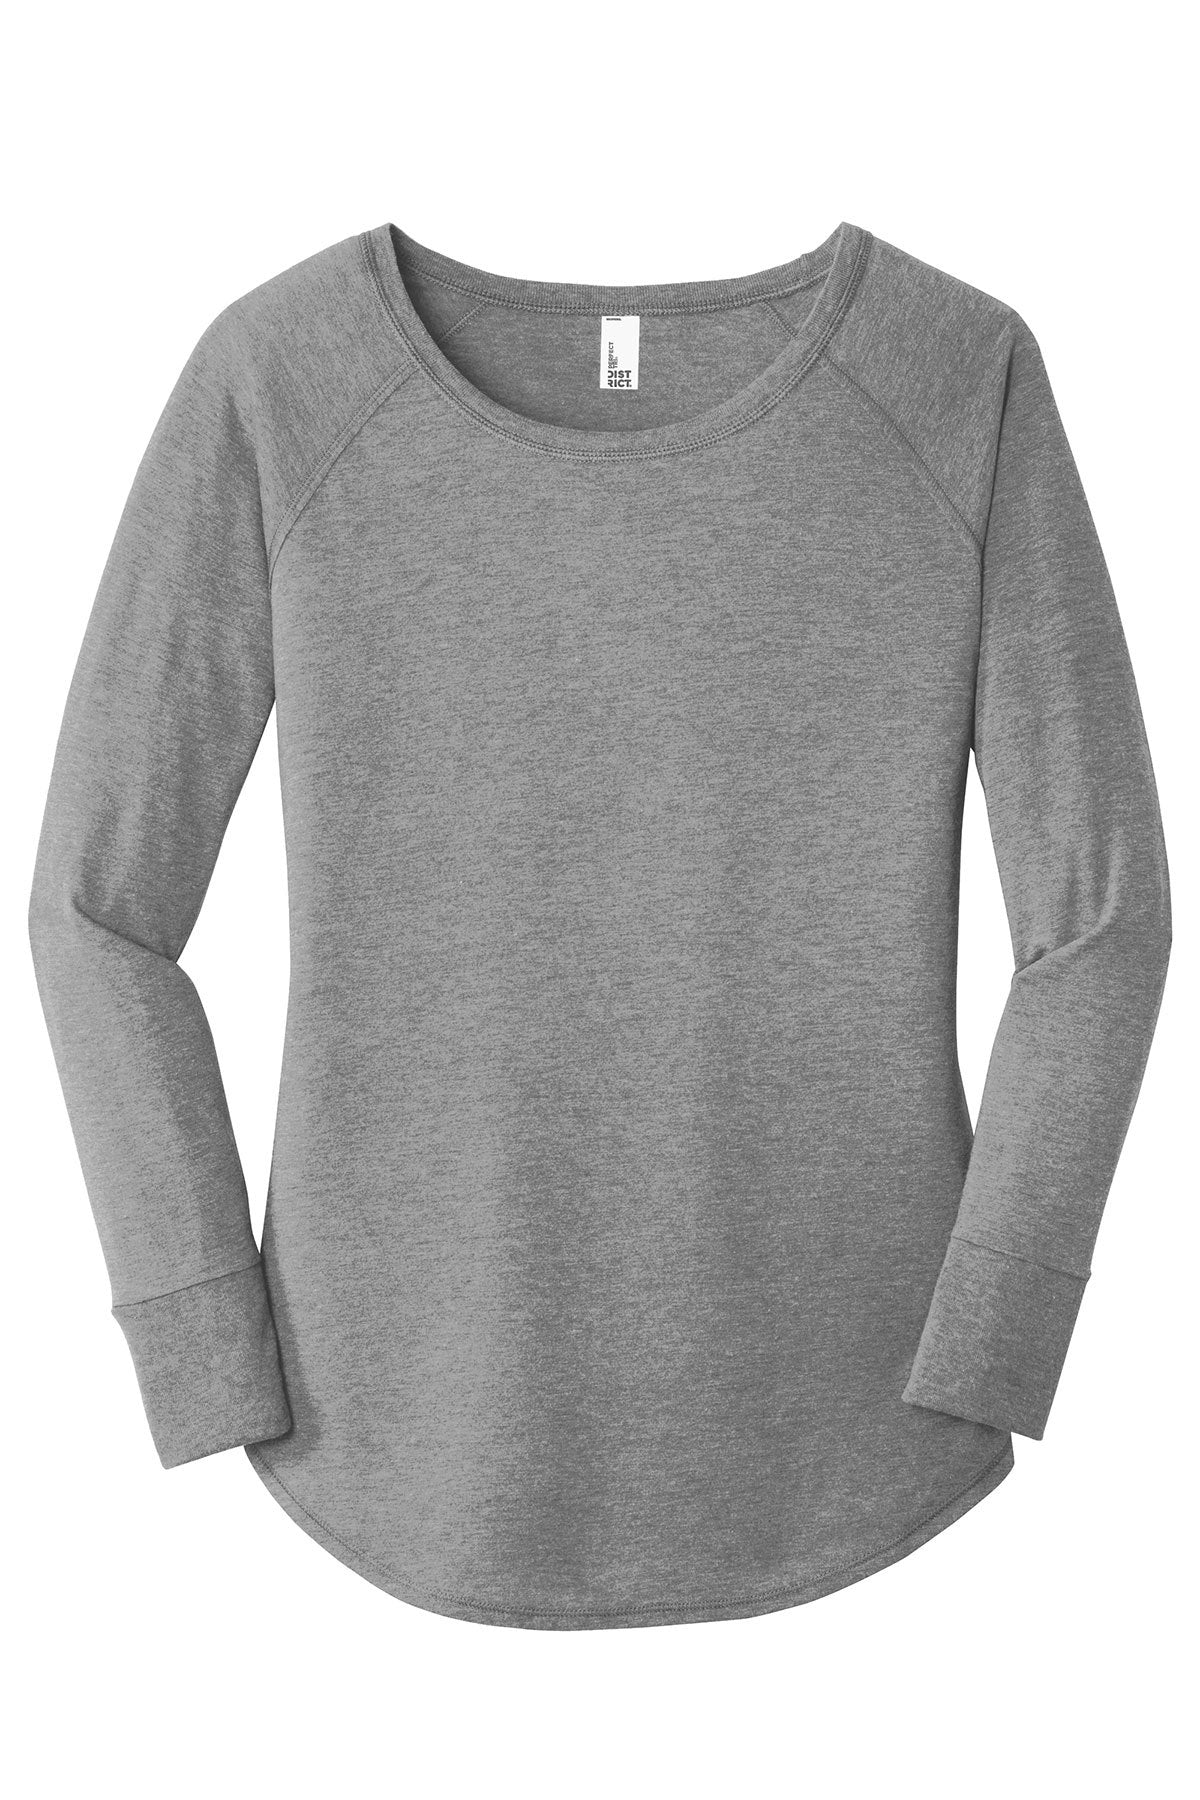 DT132L District ® Women’s Perfect Tri ® Long Sleeve Tunic Tee